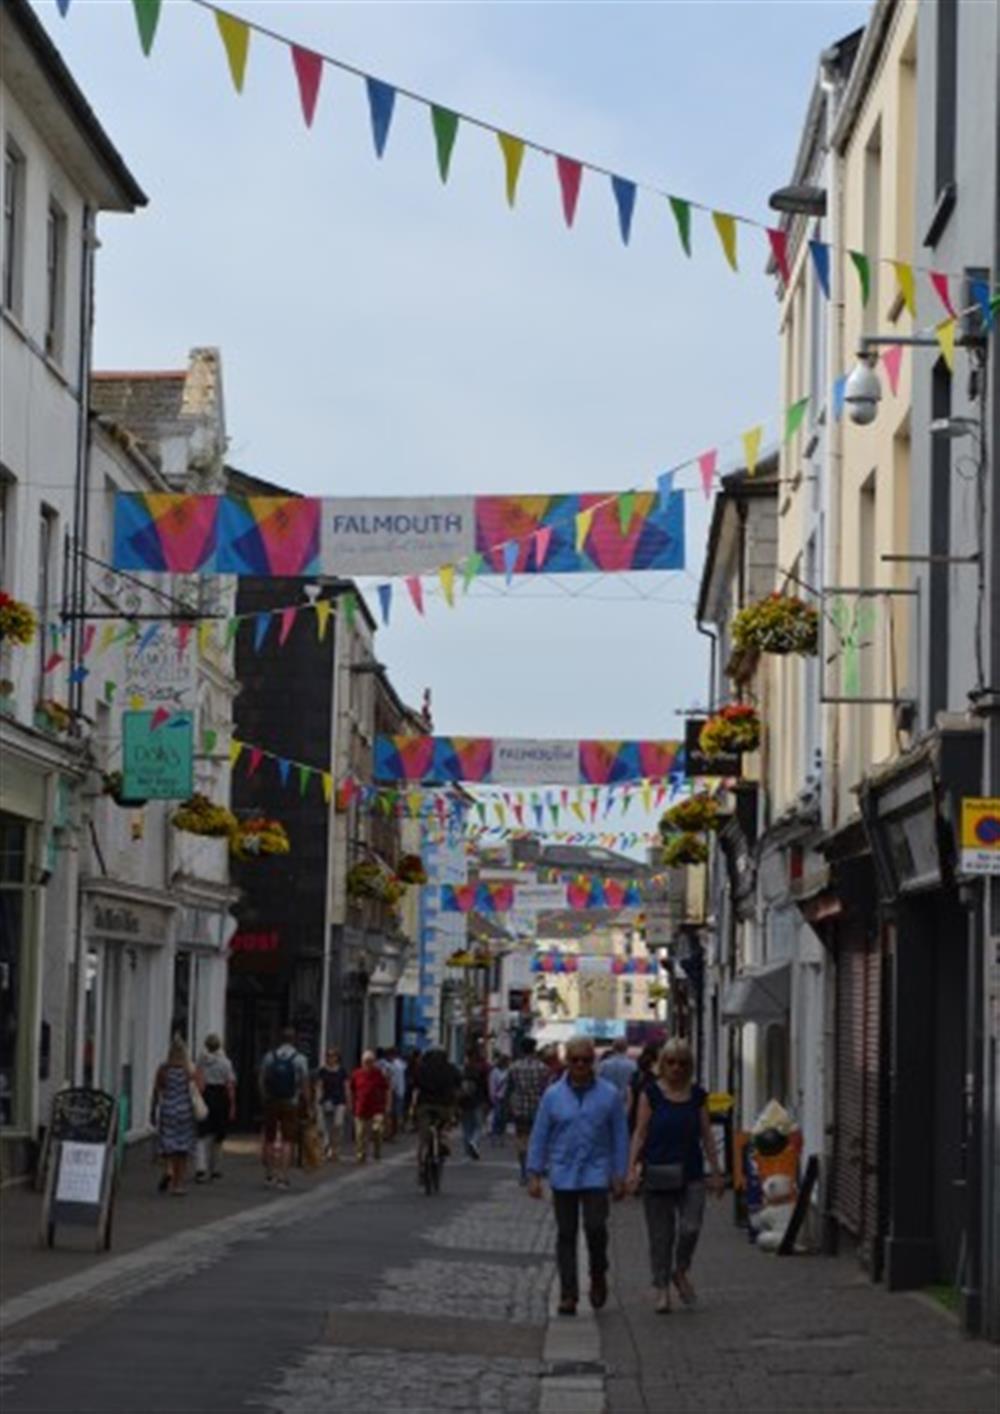 Falmouth town has an array of shops, plus a range of restaurants, cafes and art galleries at 73 Upper Barn in Maenporth